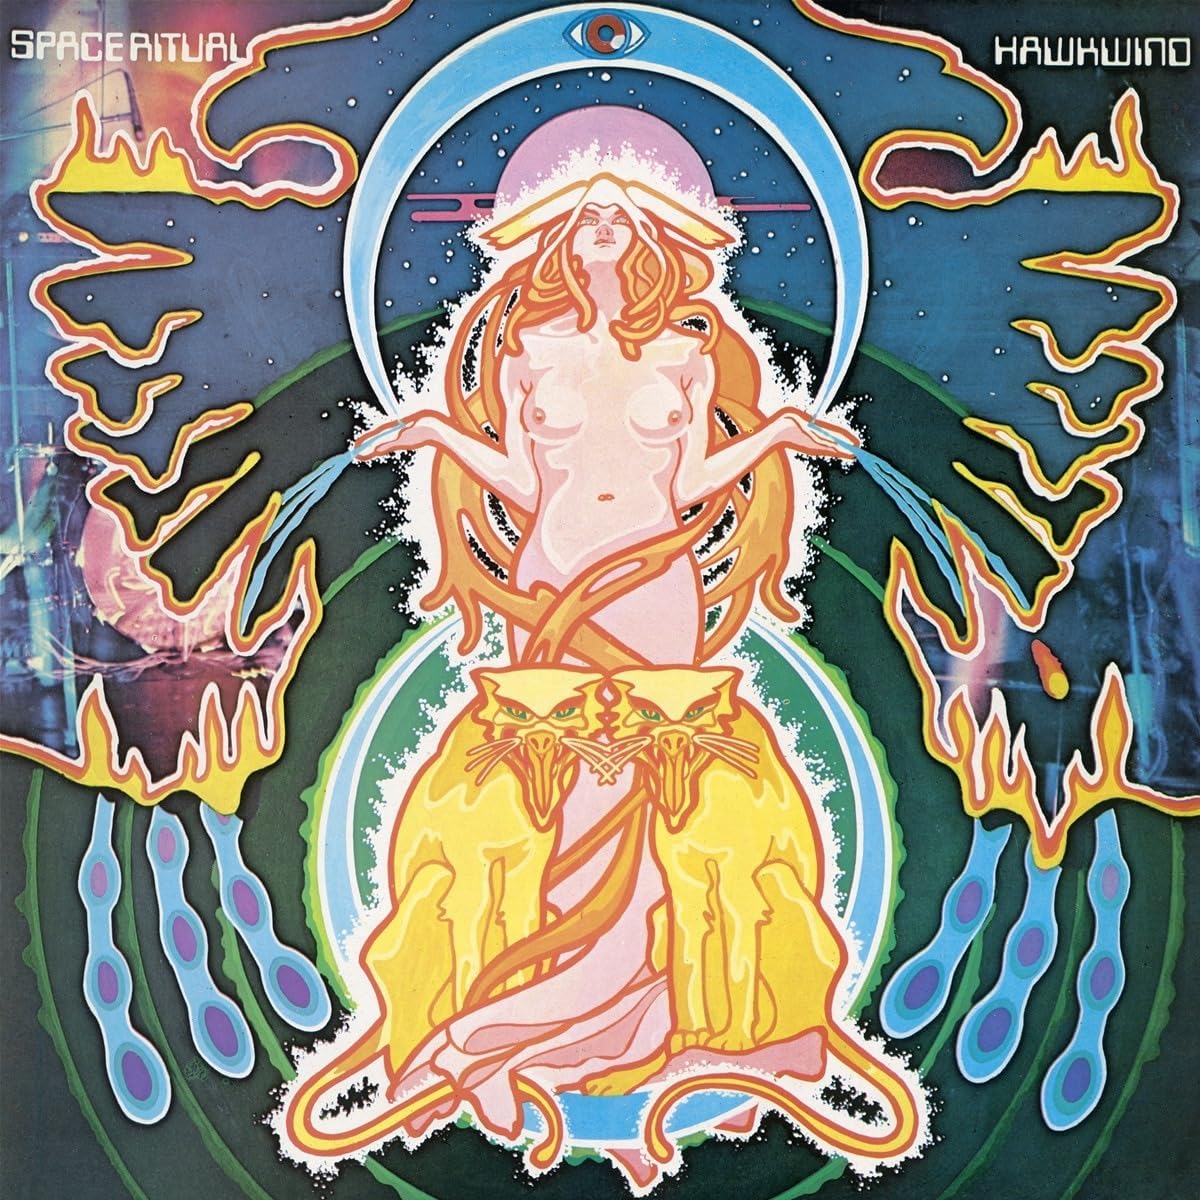 HAWKWIND -  Space Ritual - Deluxe 50th Anniversary Edition